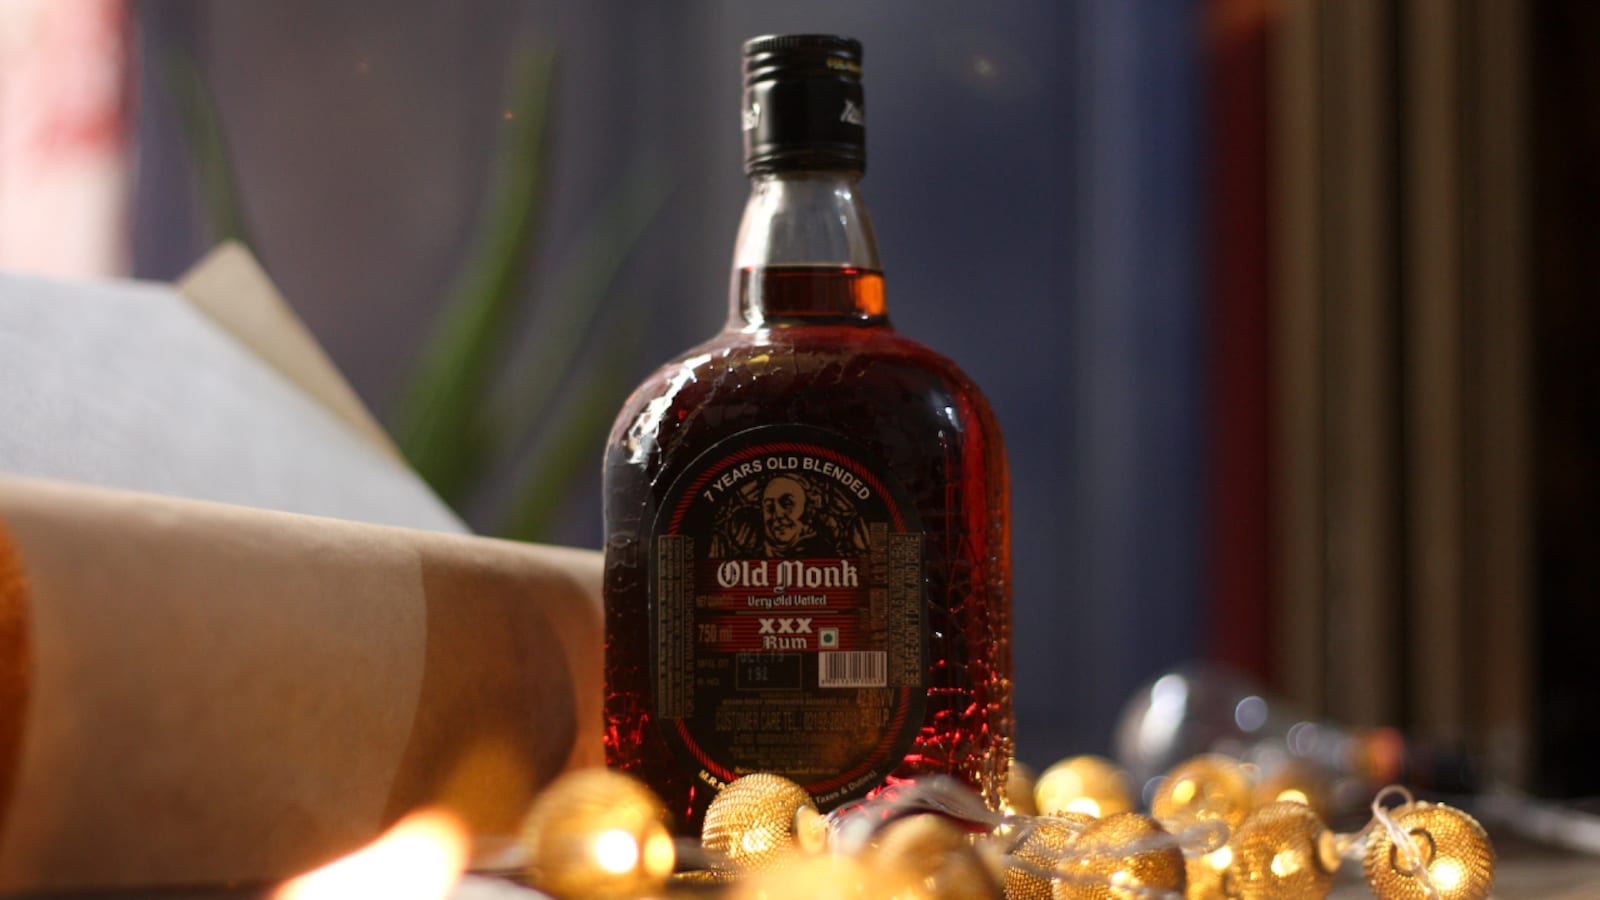 Old Monk chai, and India's love affair with dark rum